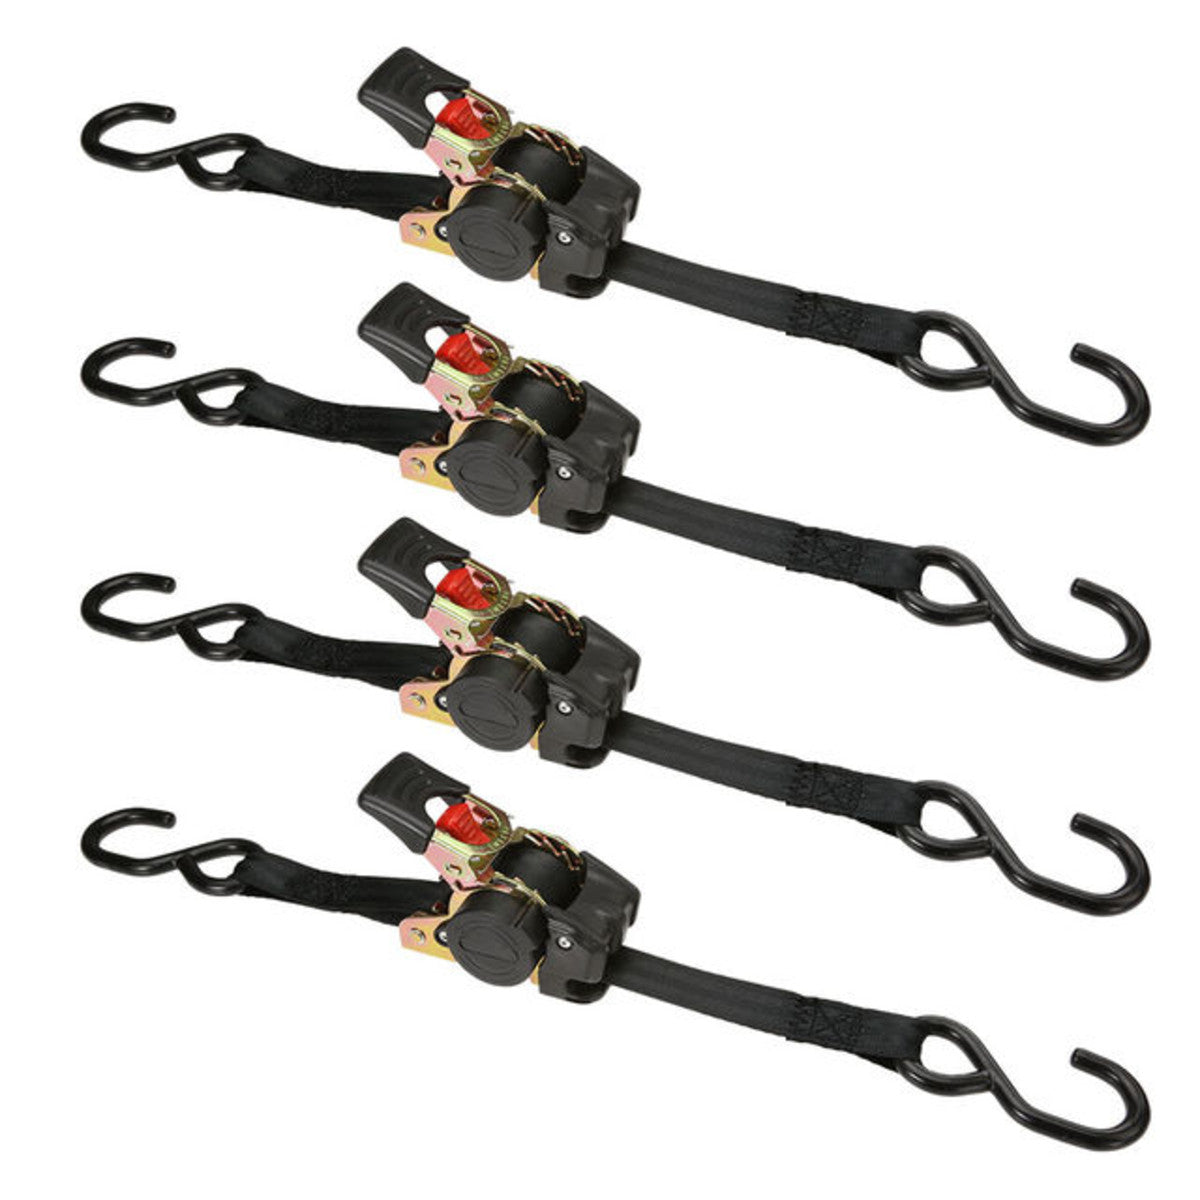 1 x 6 Cam Buckle Strap Tie-Downs with S-Hooks - 4-Pack